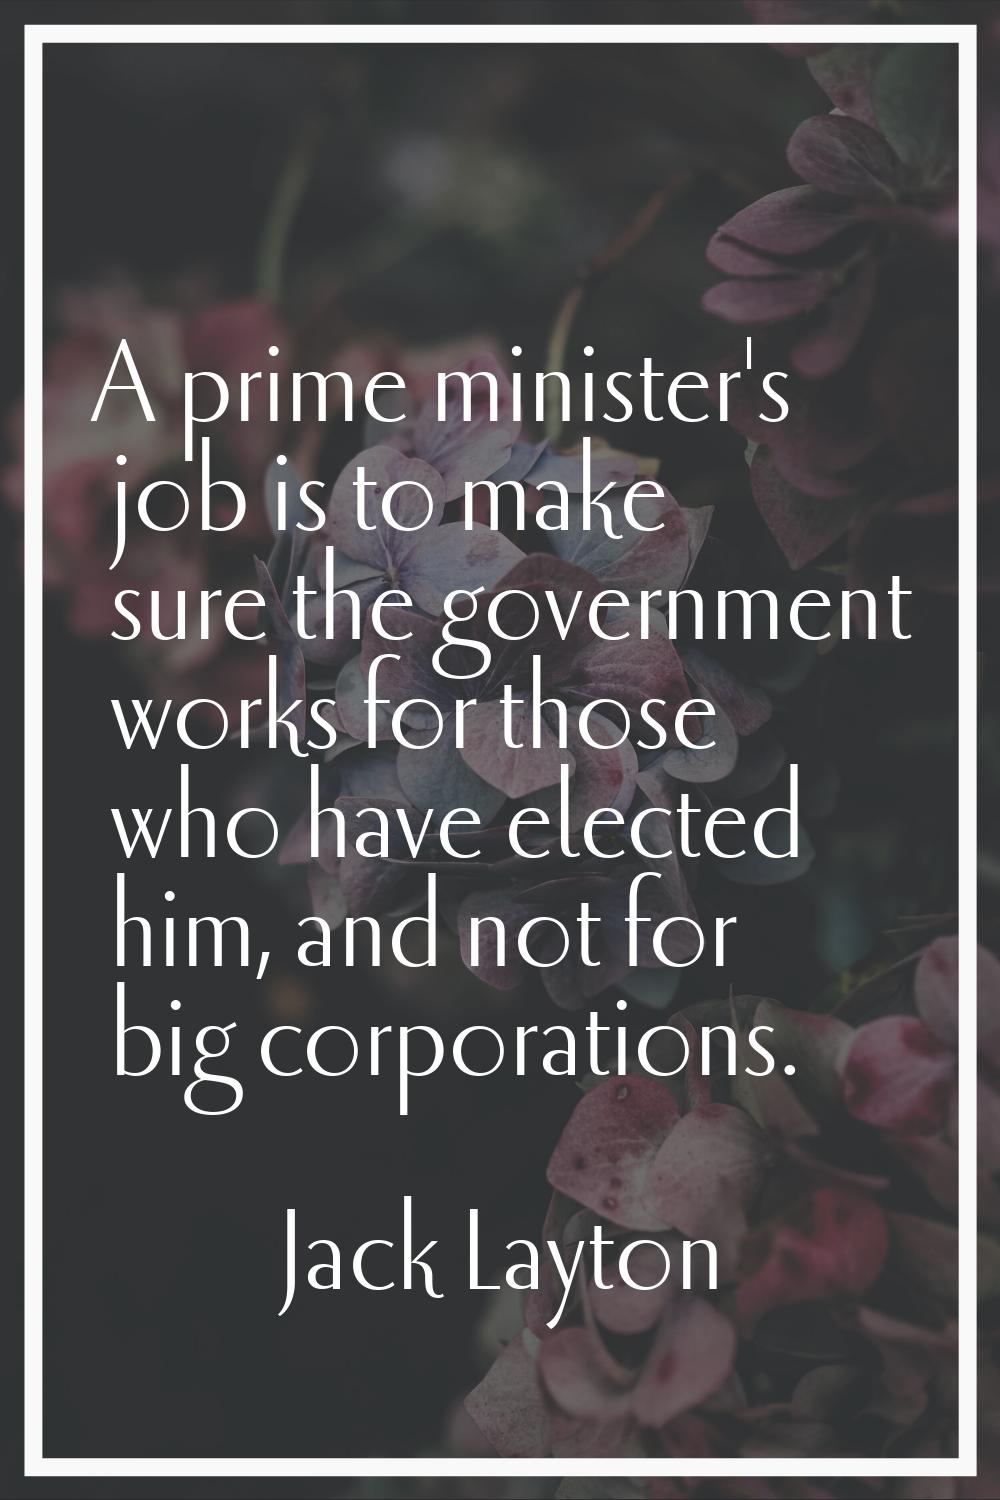 A prime minister's job is to make sure the government works for those who have elected him, and not